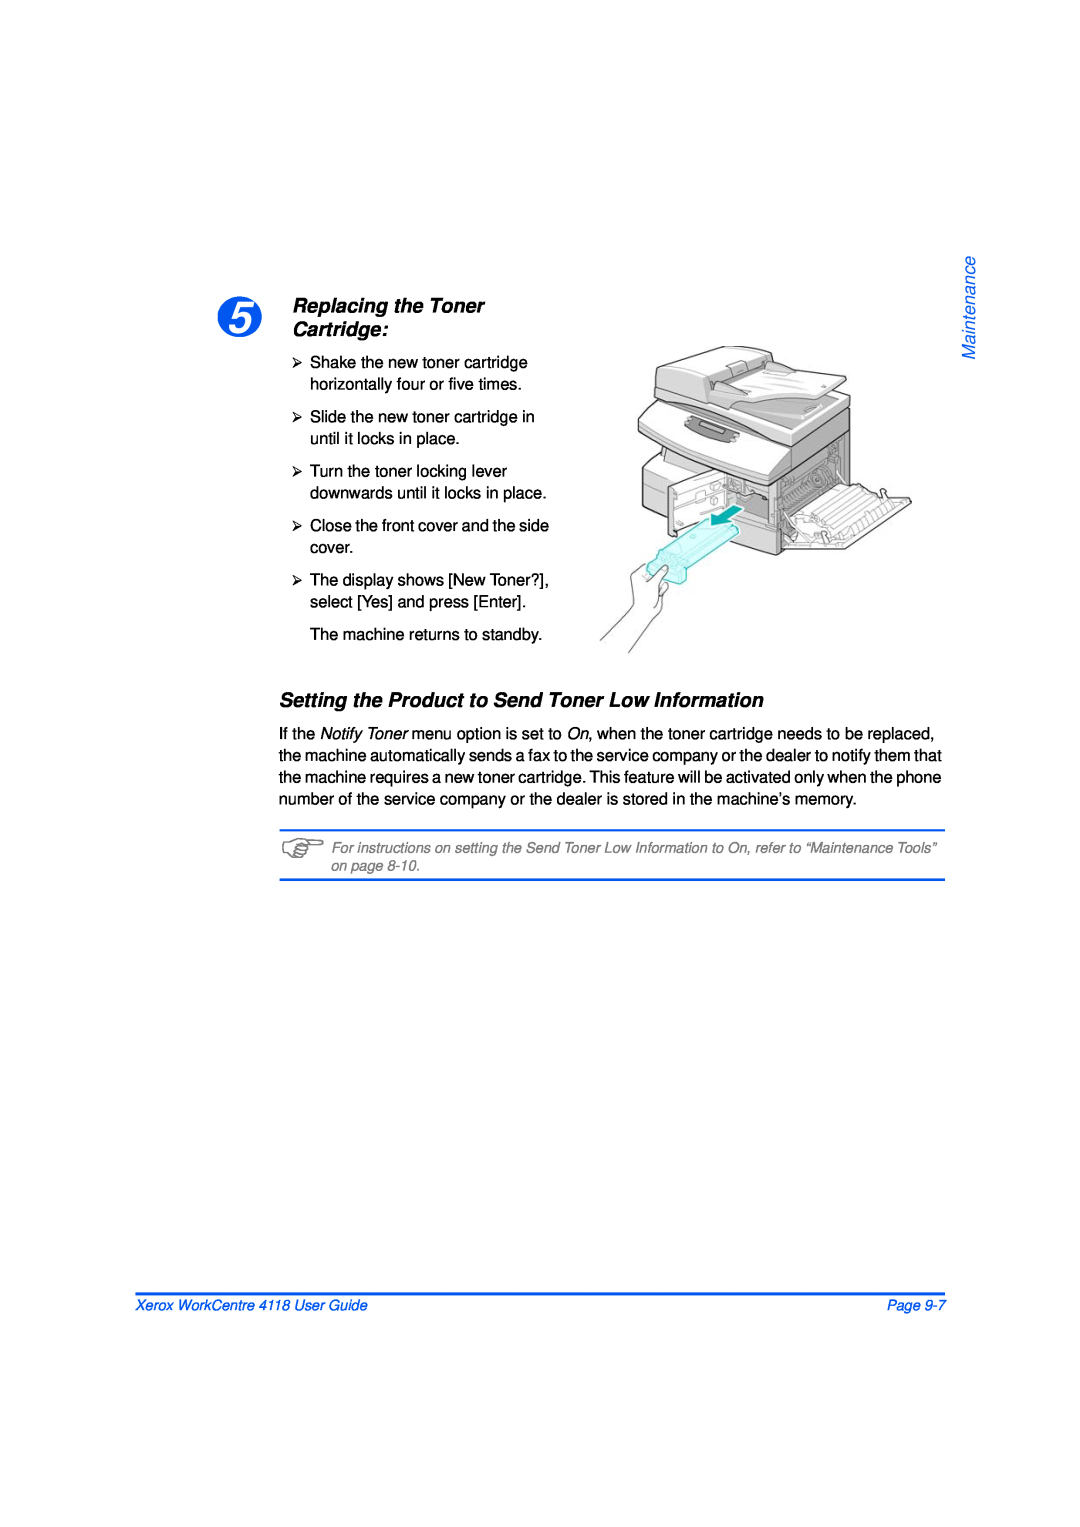 Xerox 32N00467 manual Setting the Product to Send Toner Low Information, Maintenance, Xerox WorkCentre 4118 User Guide 